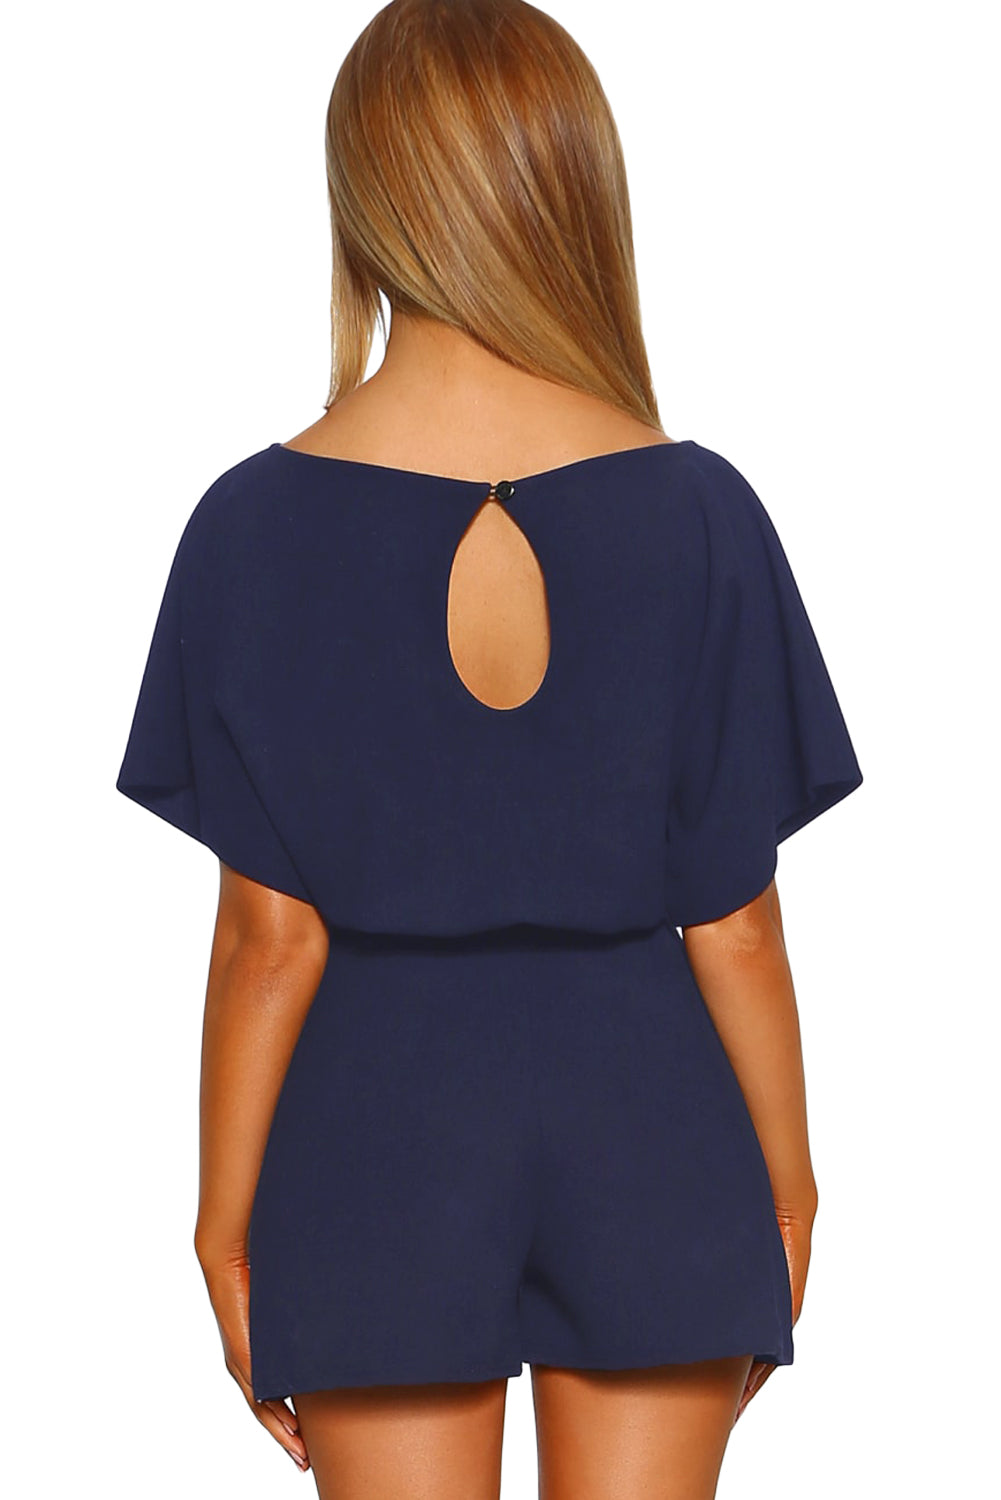 Blue Over The Top Belted Playsuit